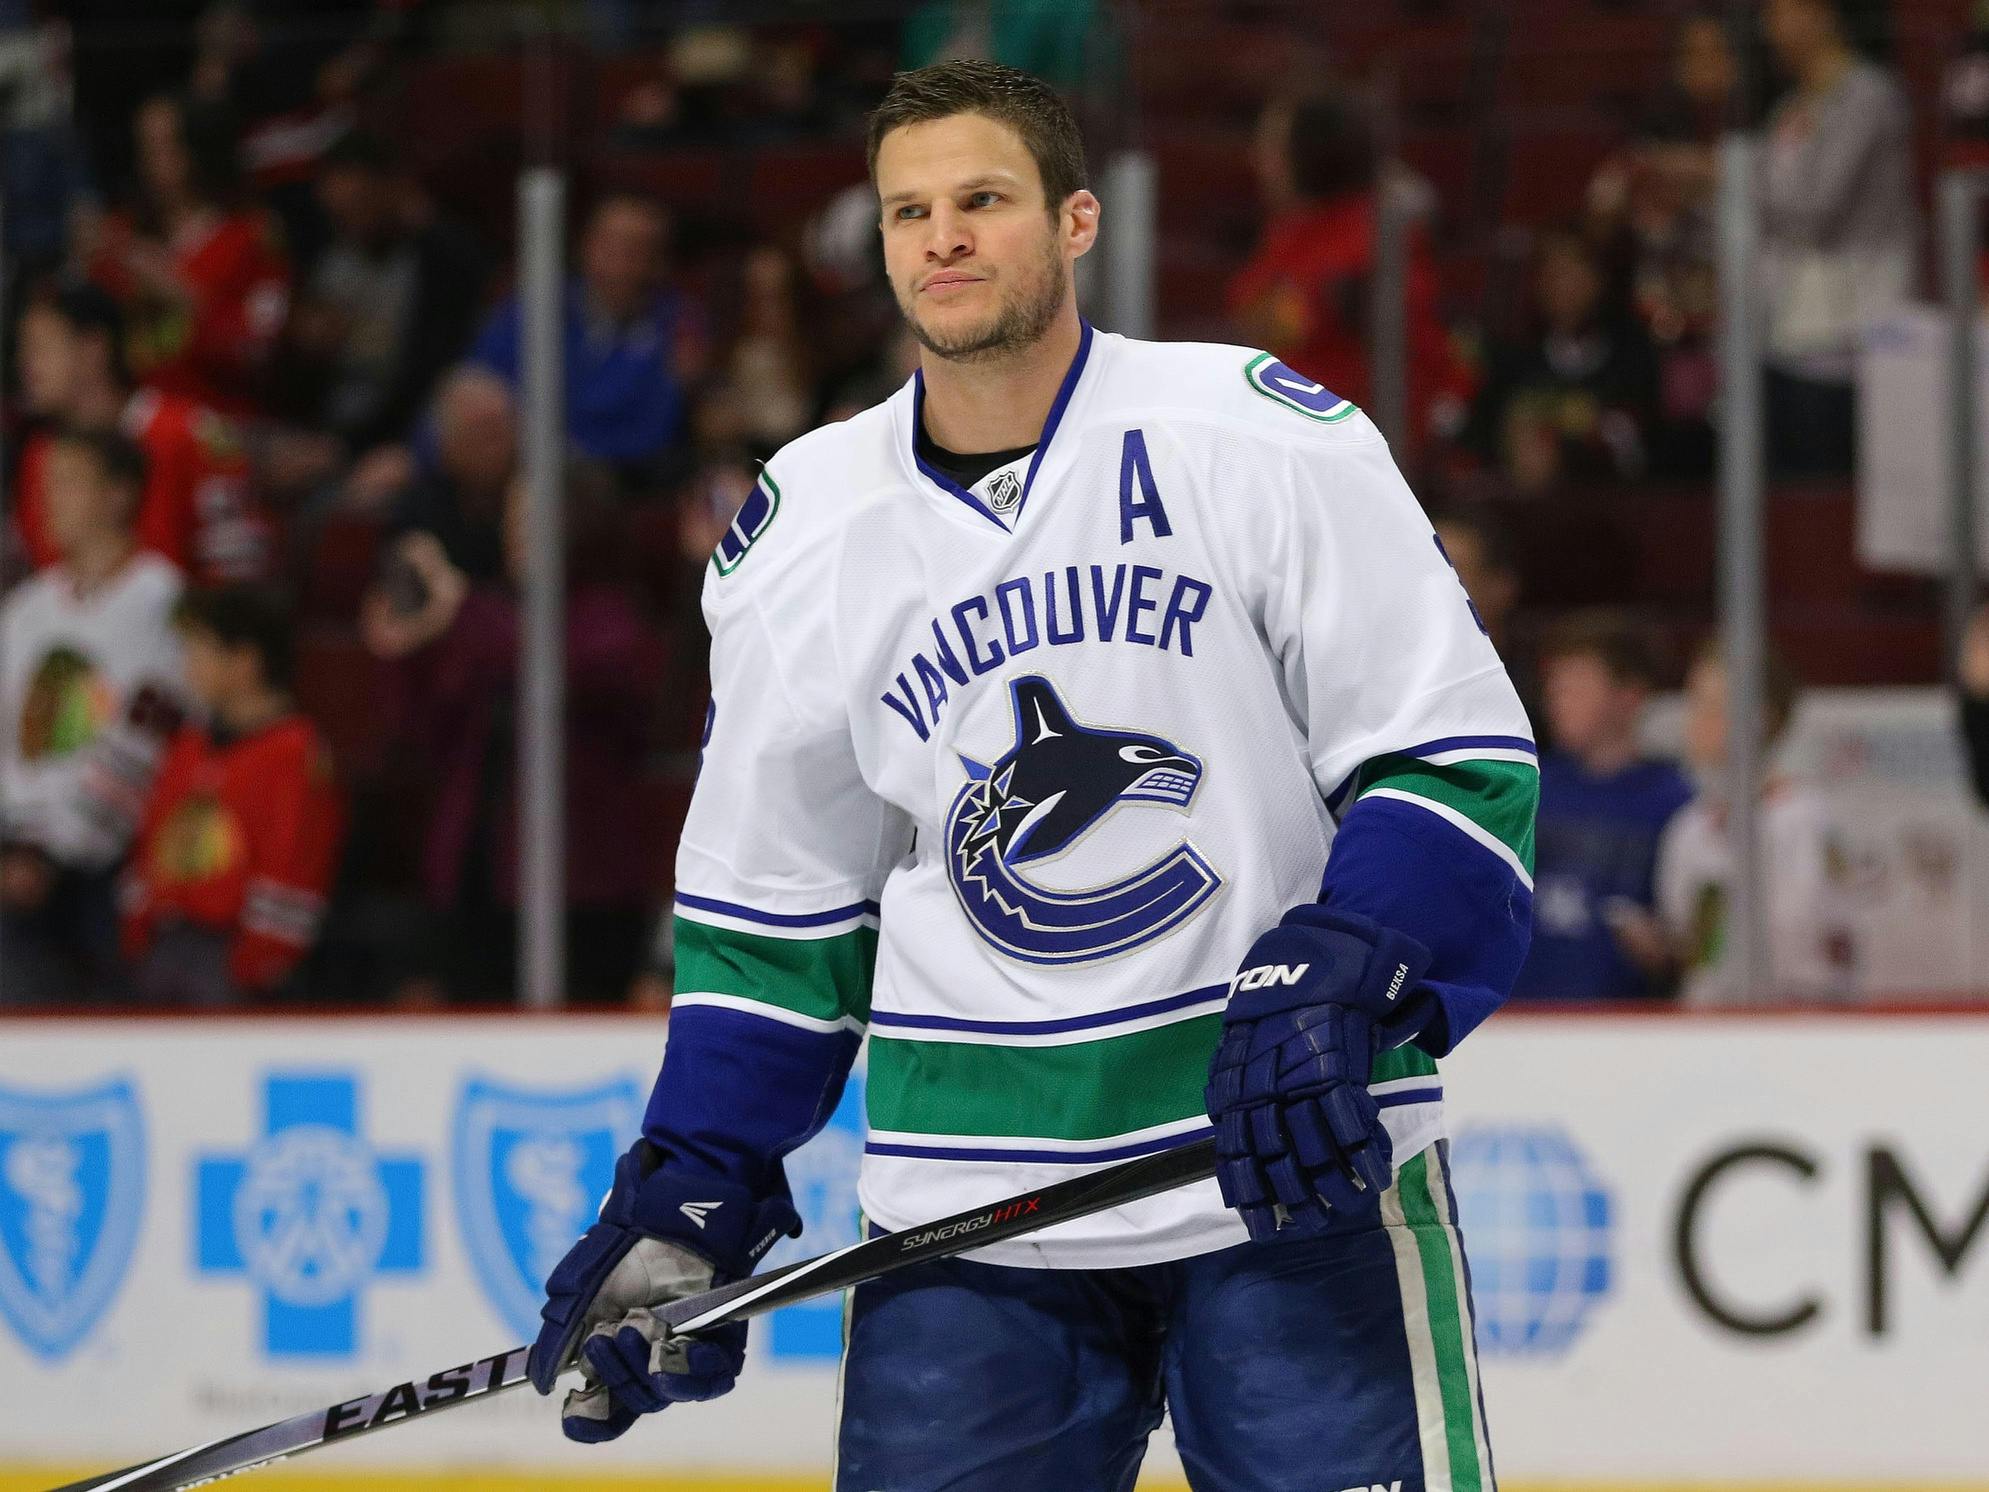 VIDEO: One-on-one with Vancouver Canucks defenseman Kevin Bieksa